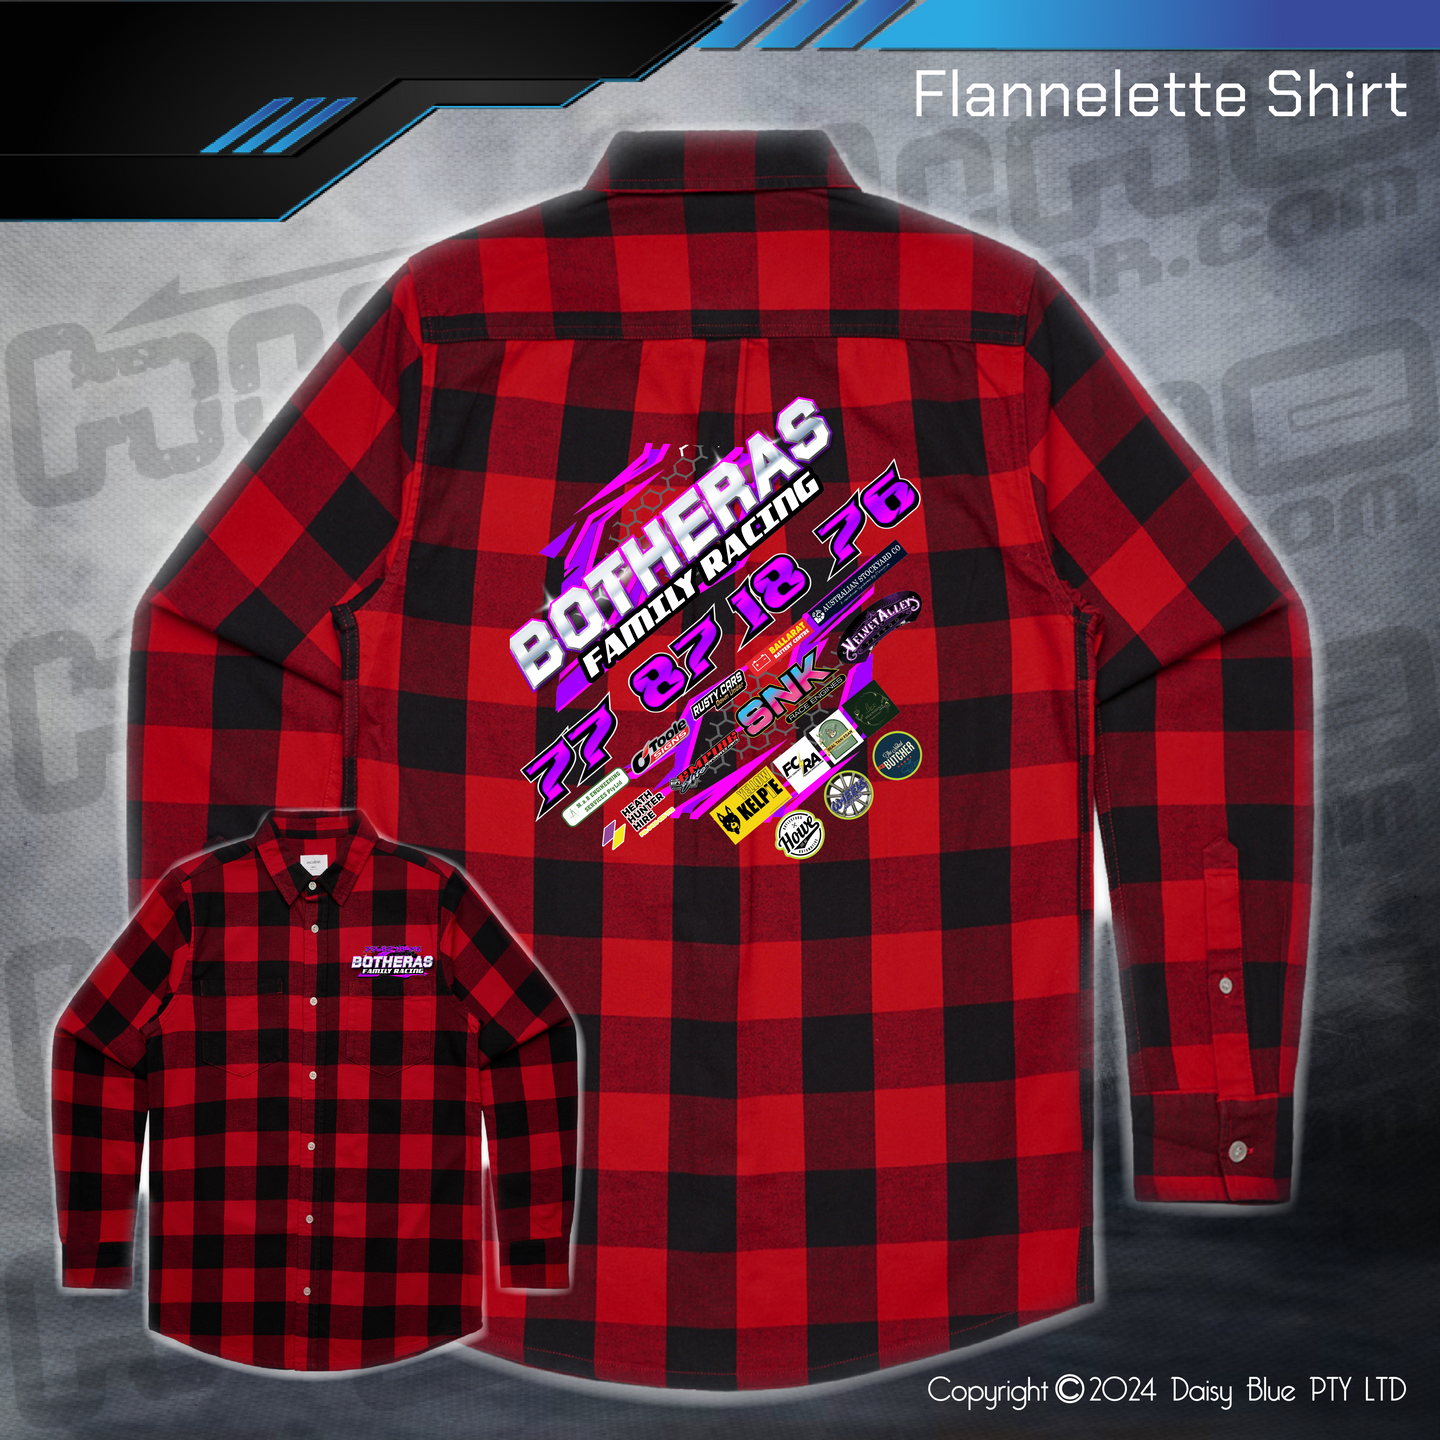 Flannelette Shirt - Botheras Family Racing